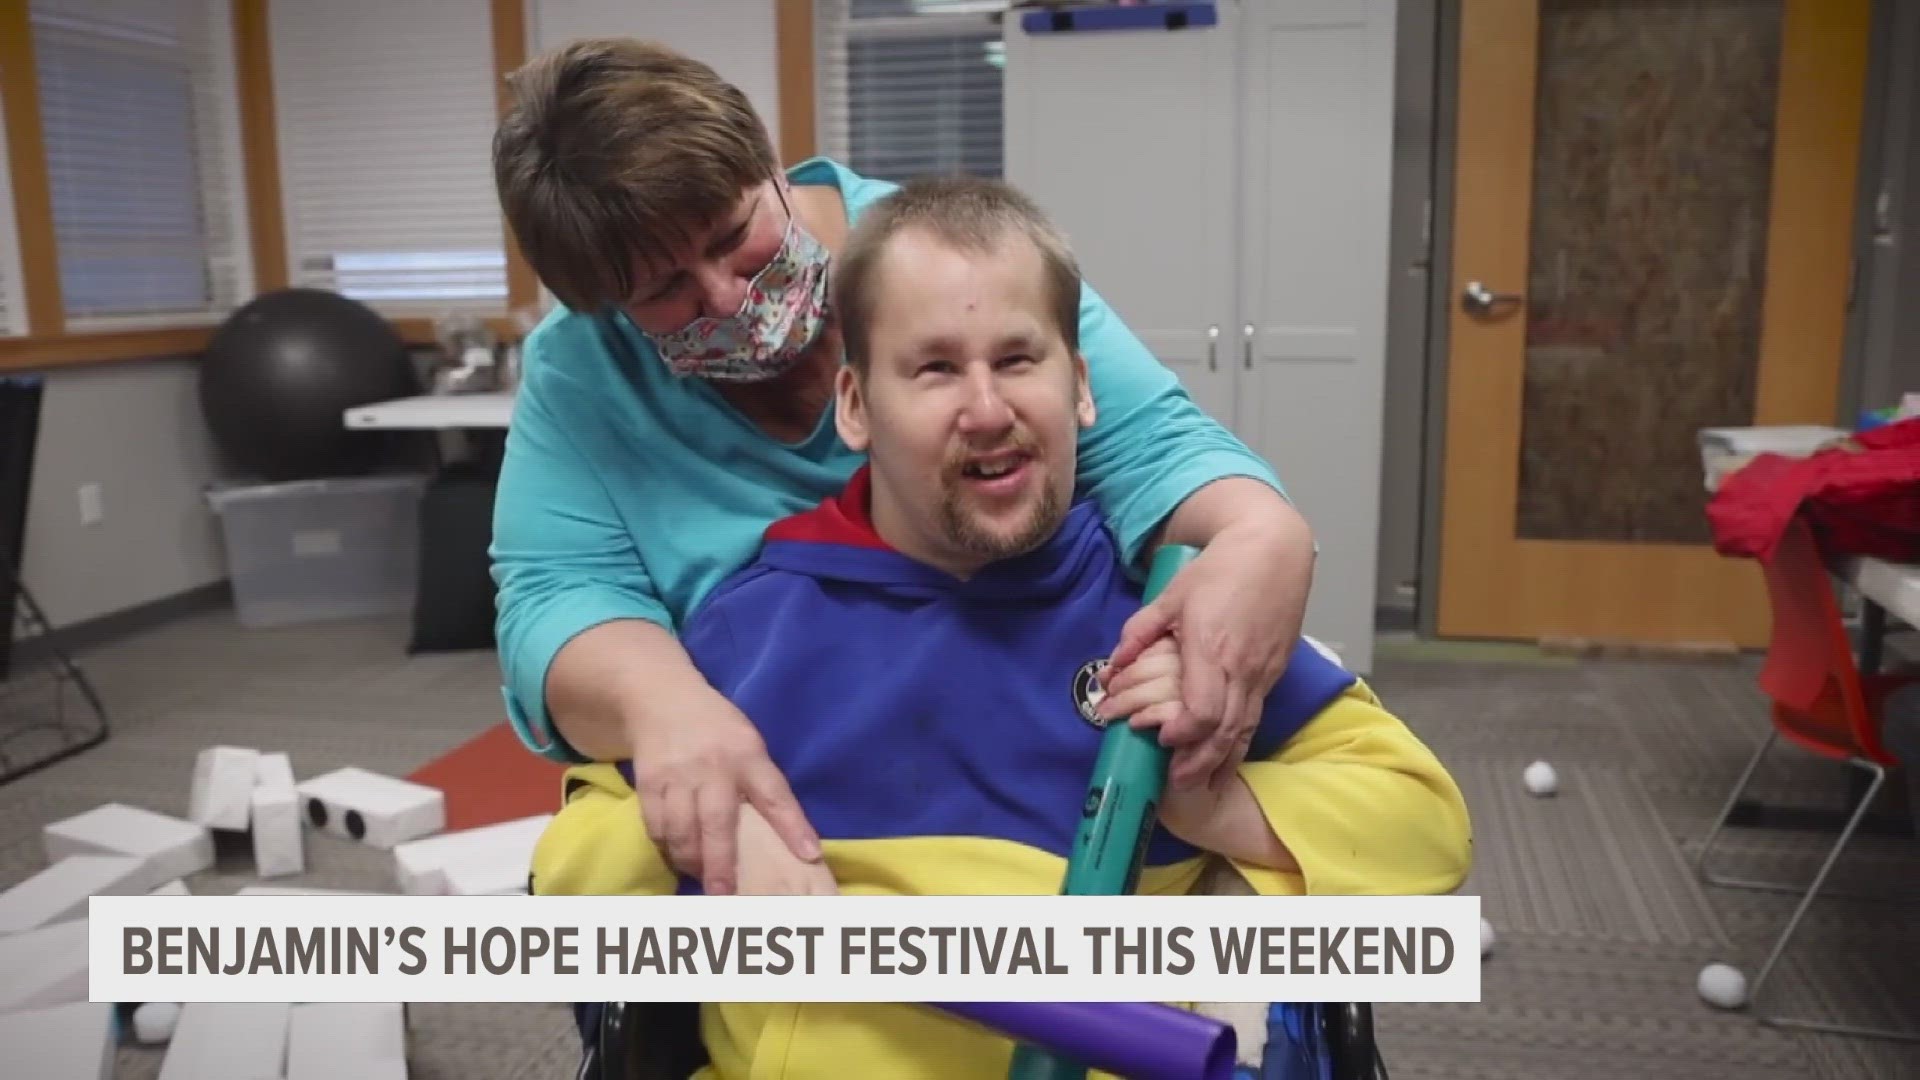 A community that serves as a home for adults with developmental disabilities is preparing for an annual event that invites the public to their farmstead.